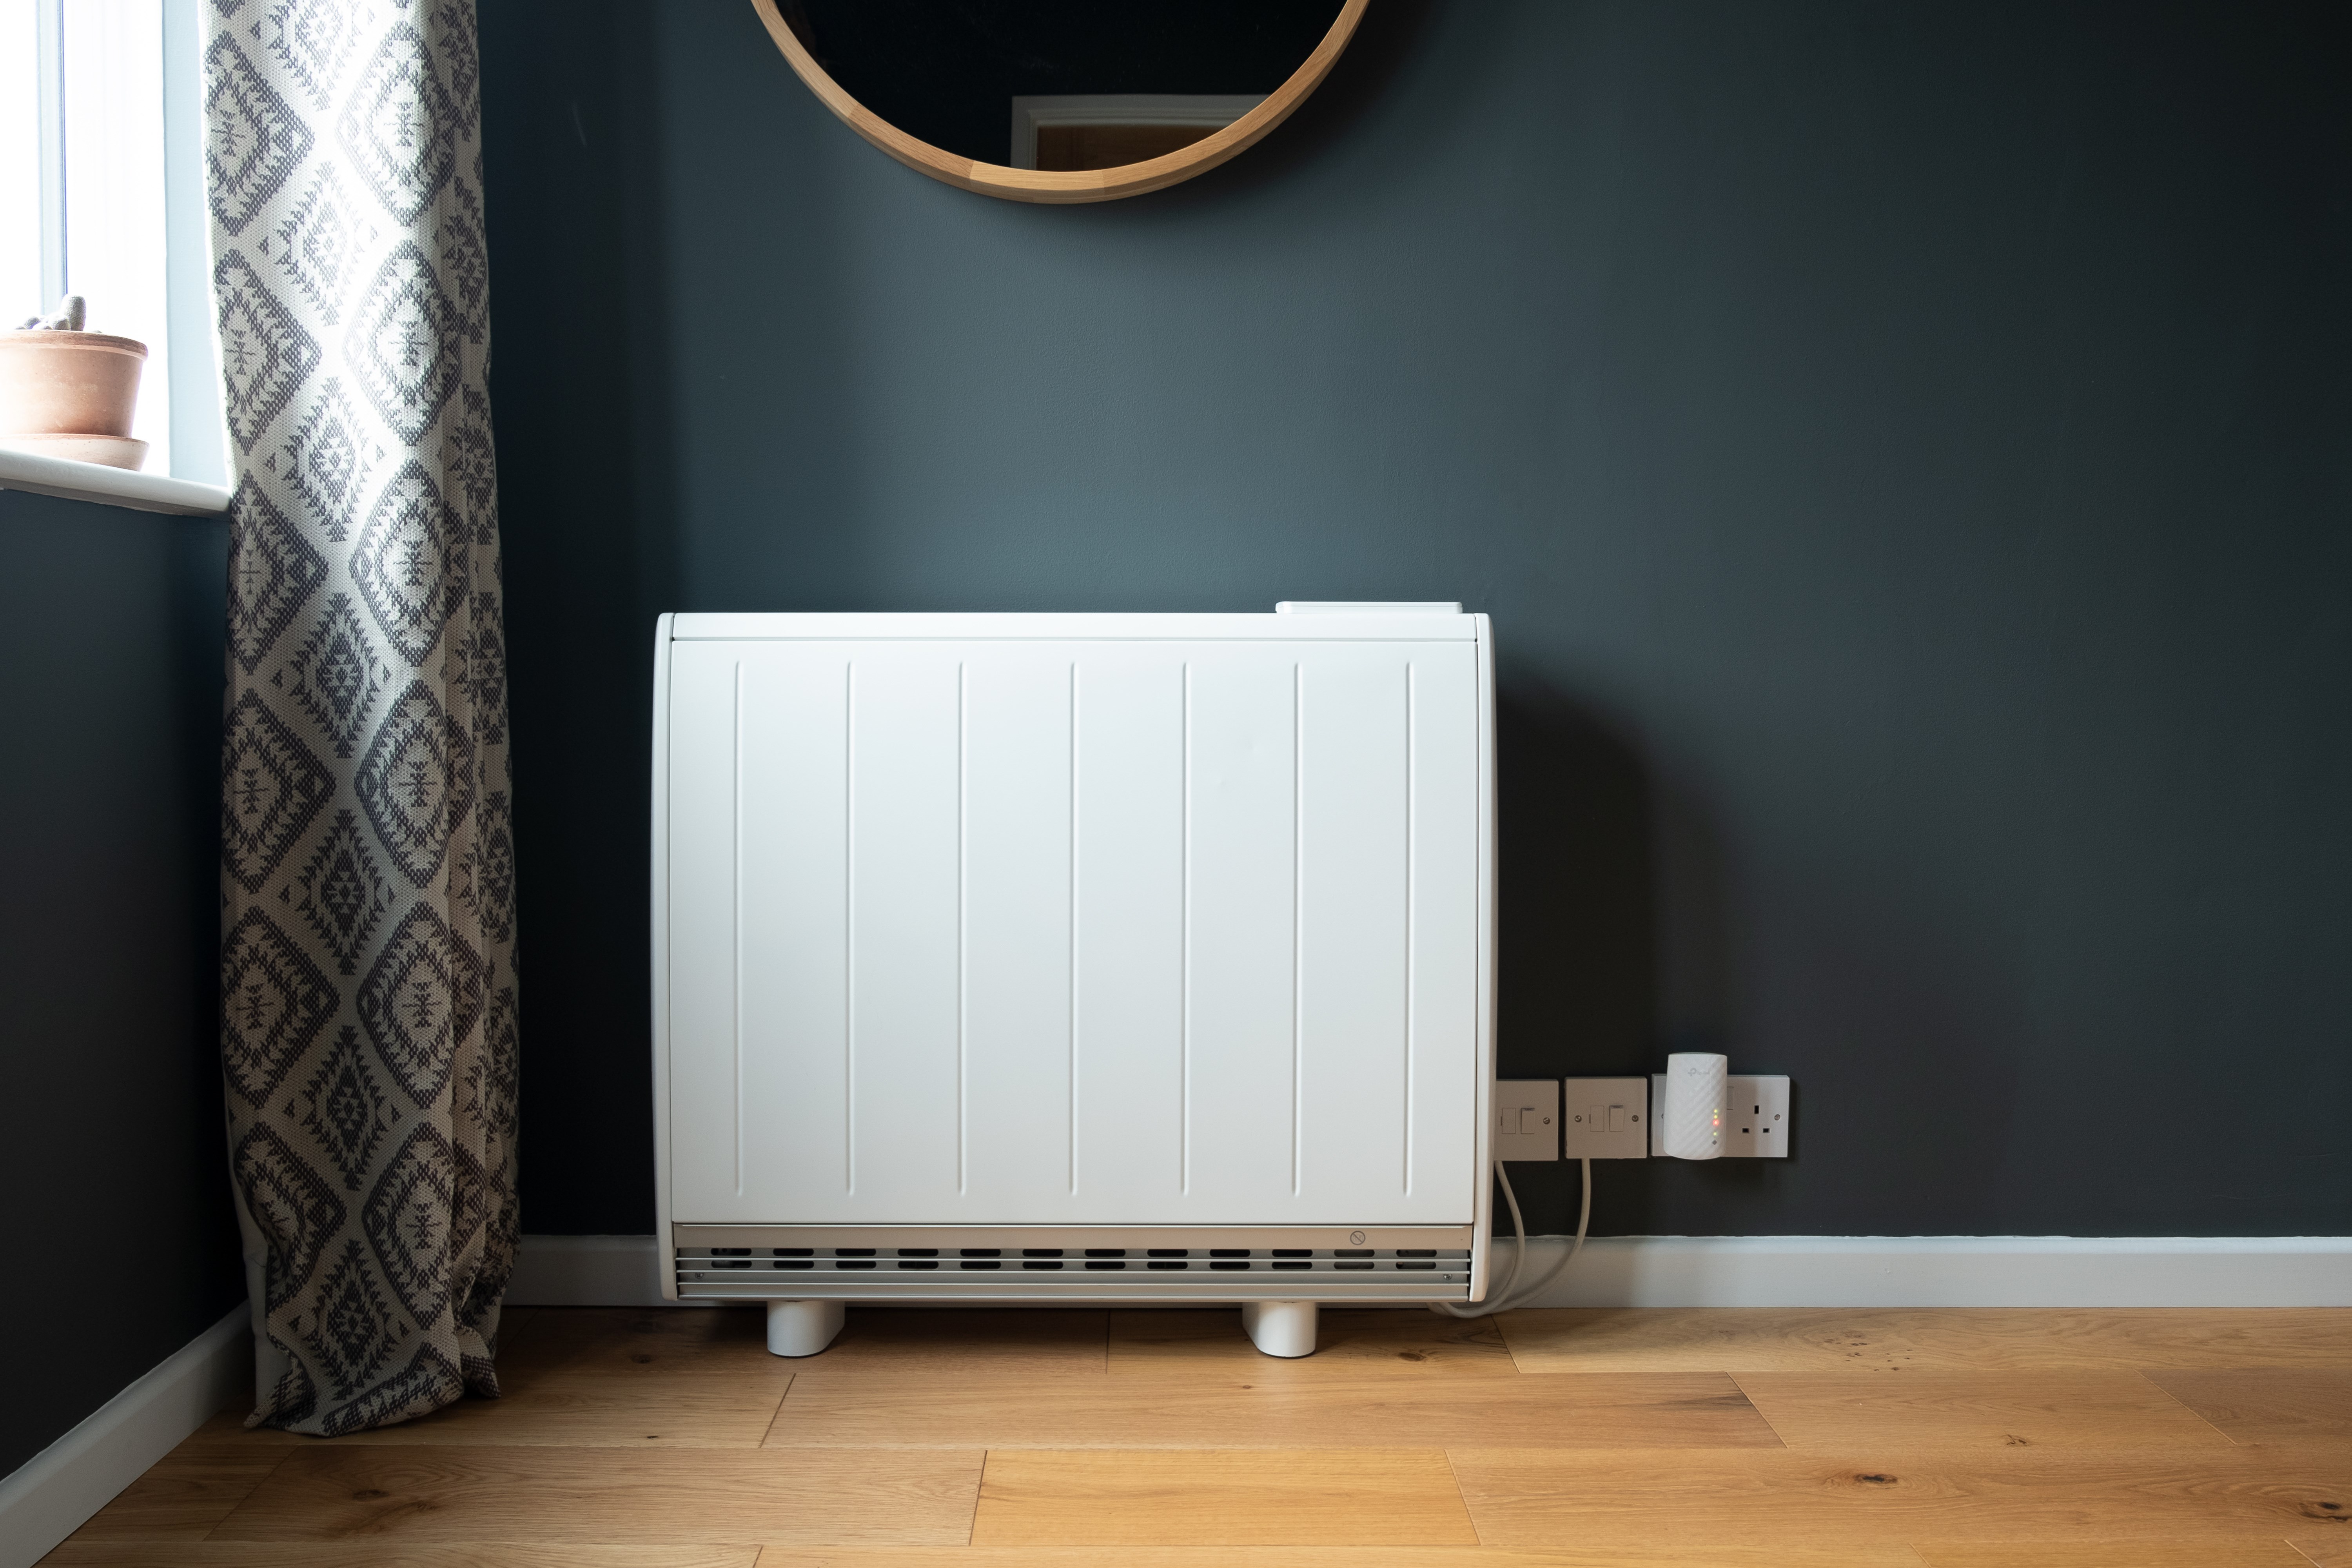 How to use a storage heater